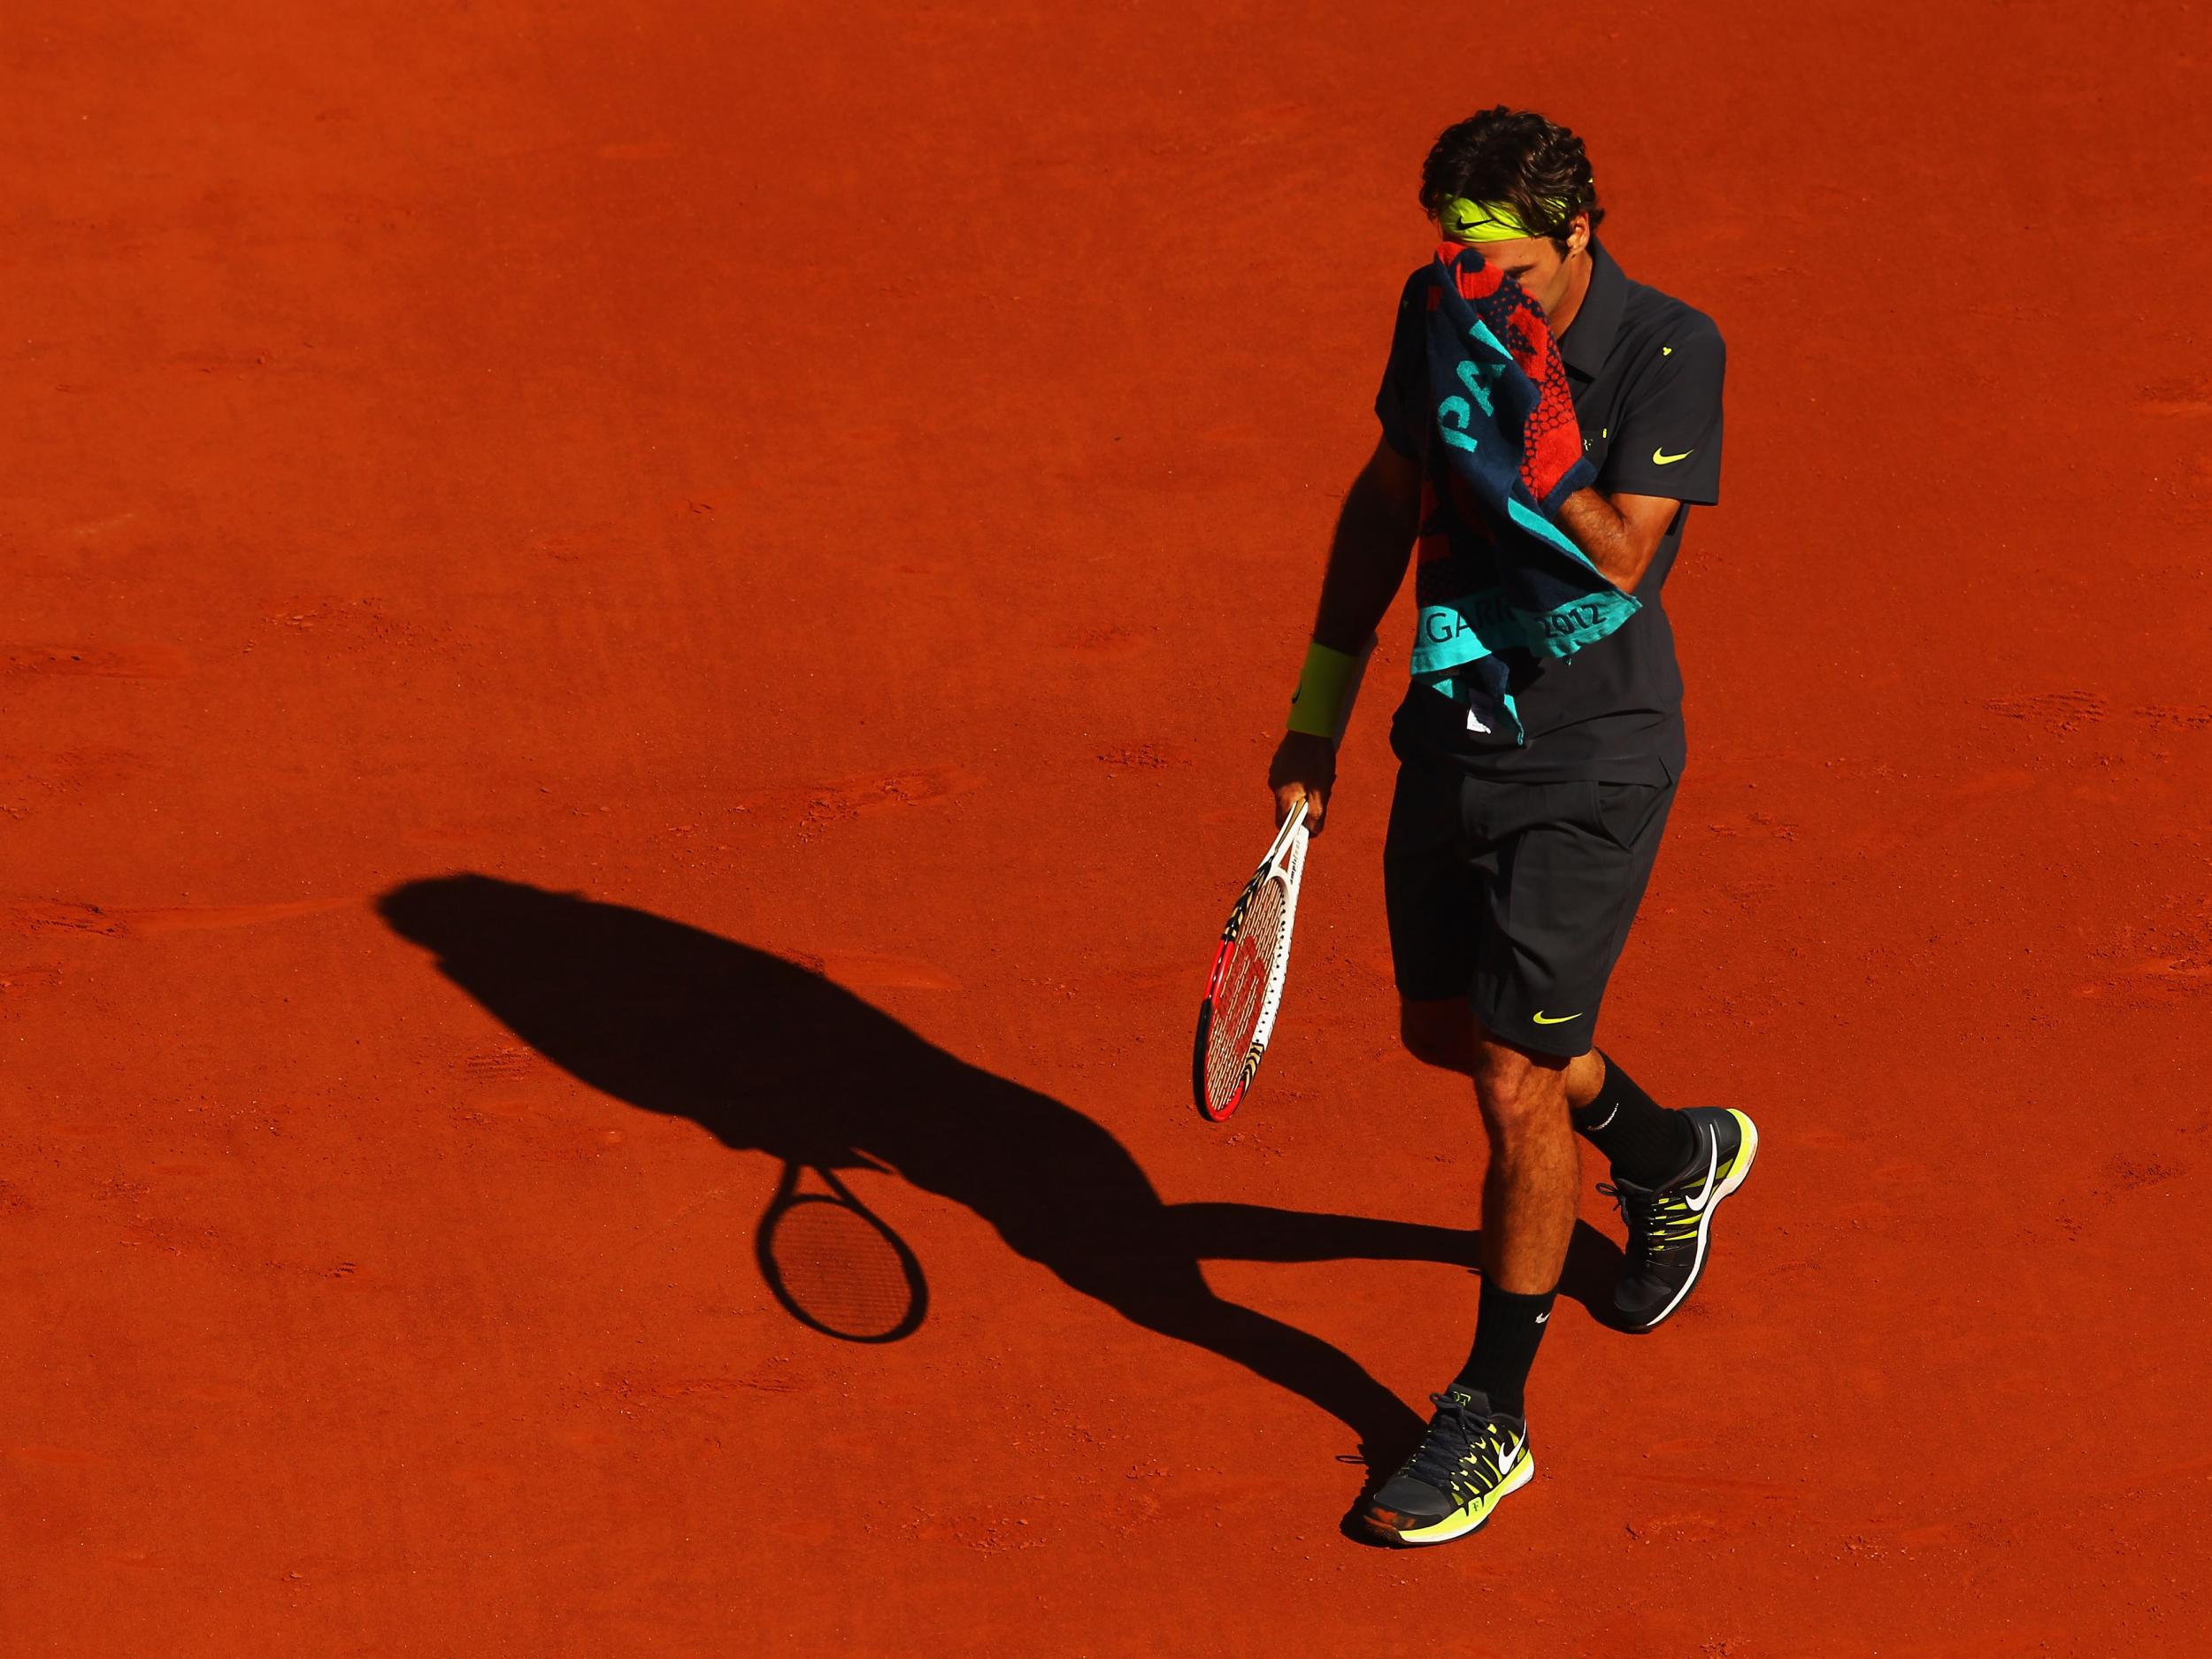 Federer has decided to skip the entire clay court season